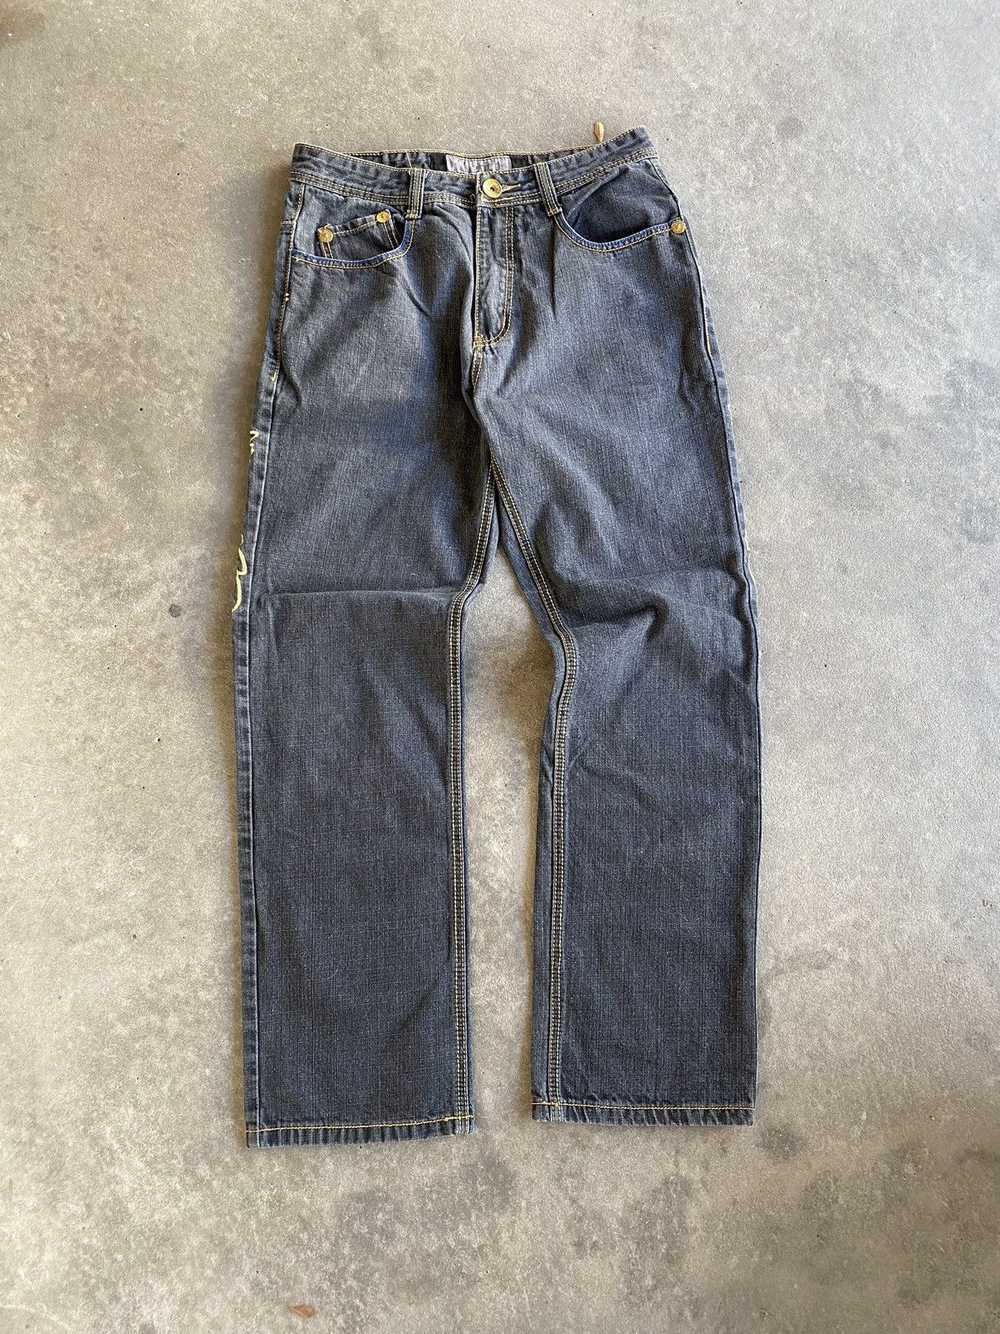 Clench × Jnco × Southpole Embroidered Clench jeans - image 1